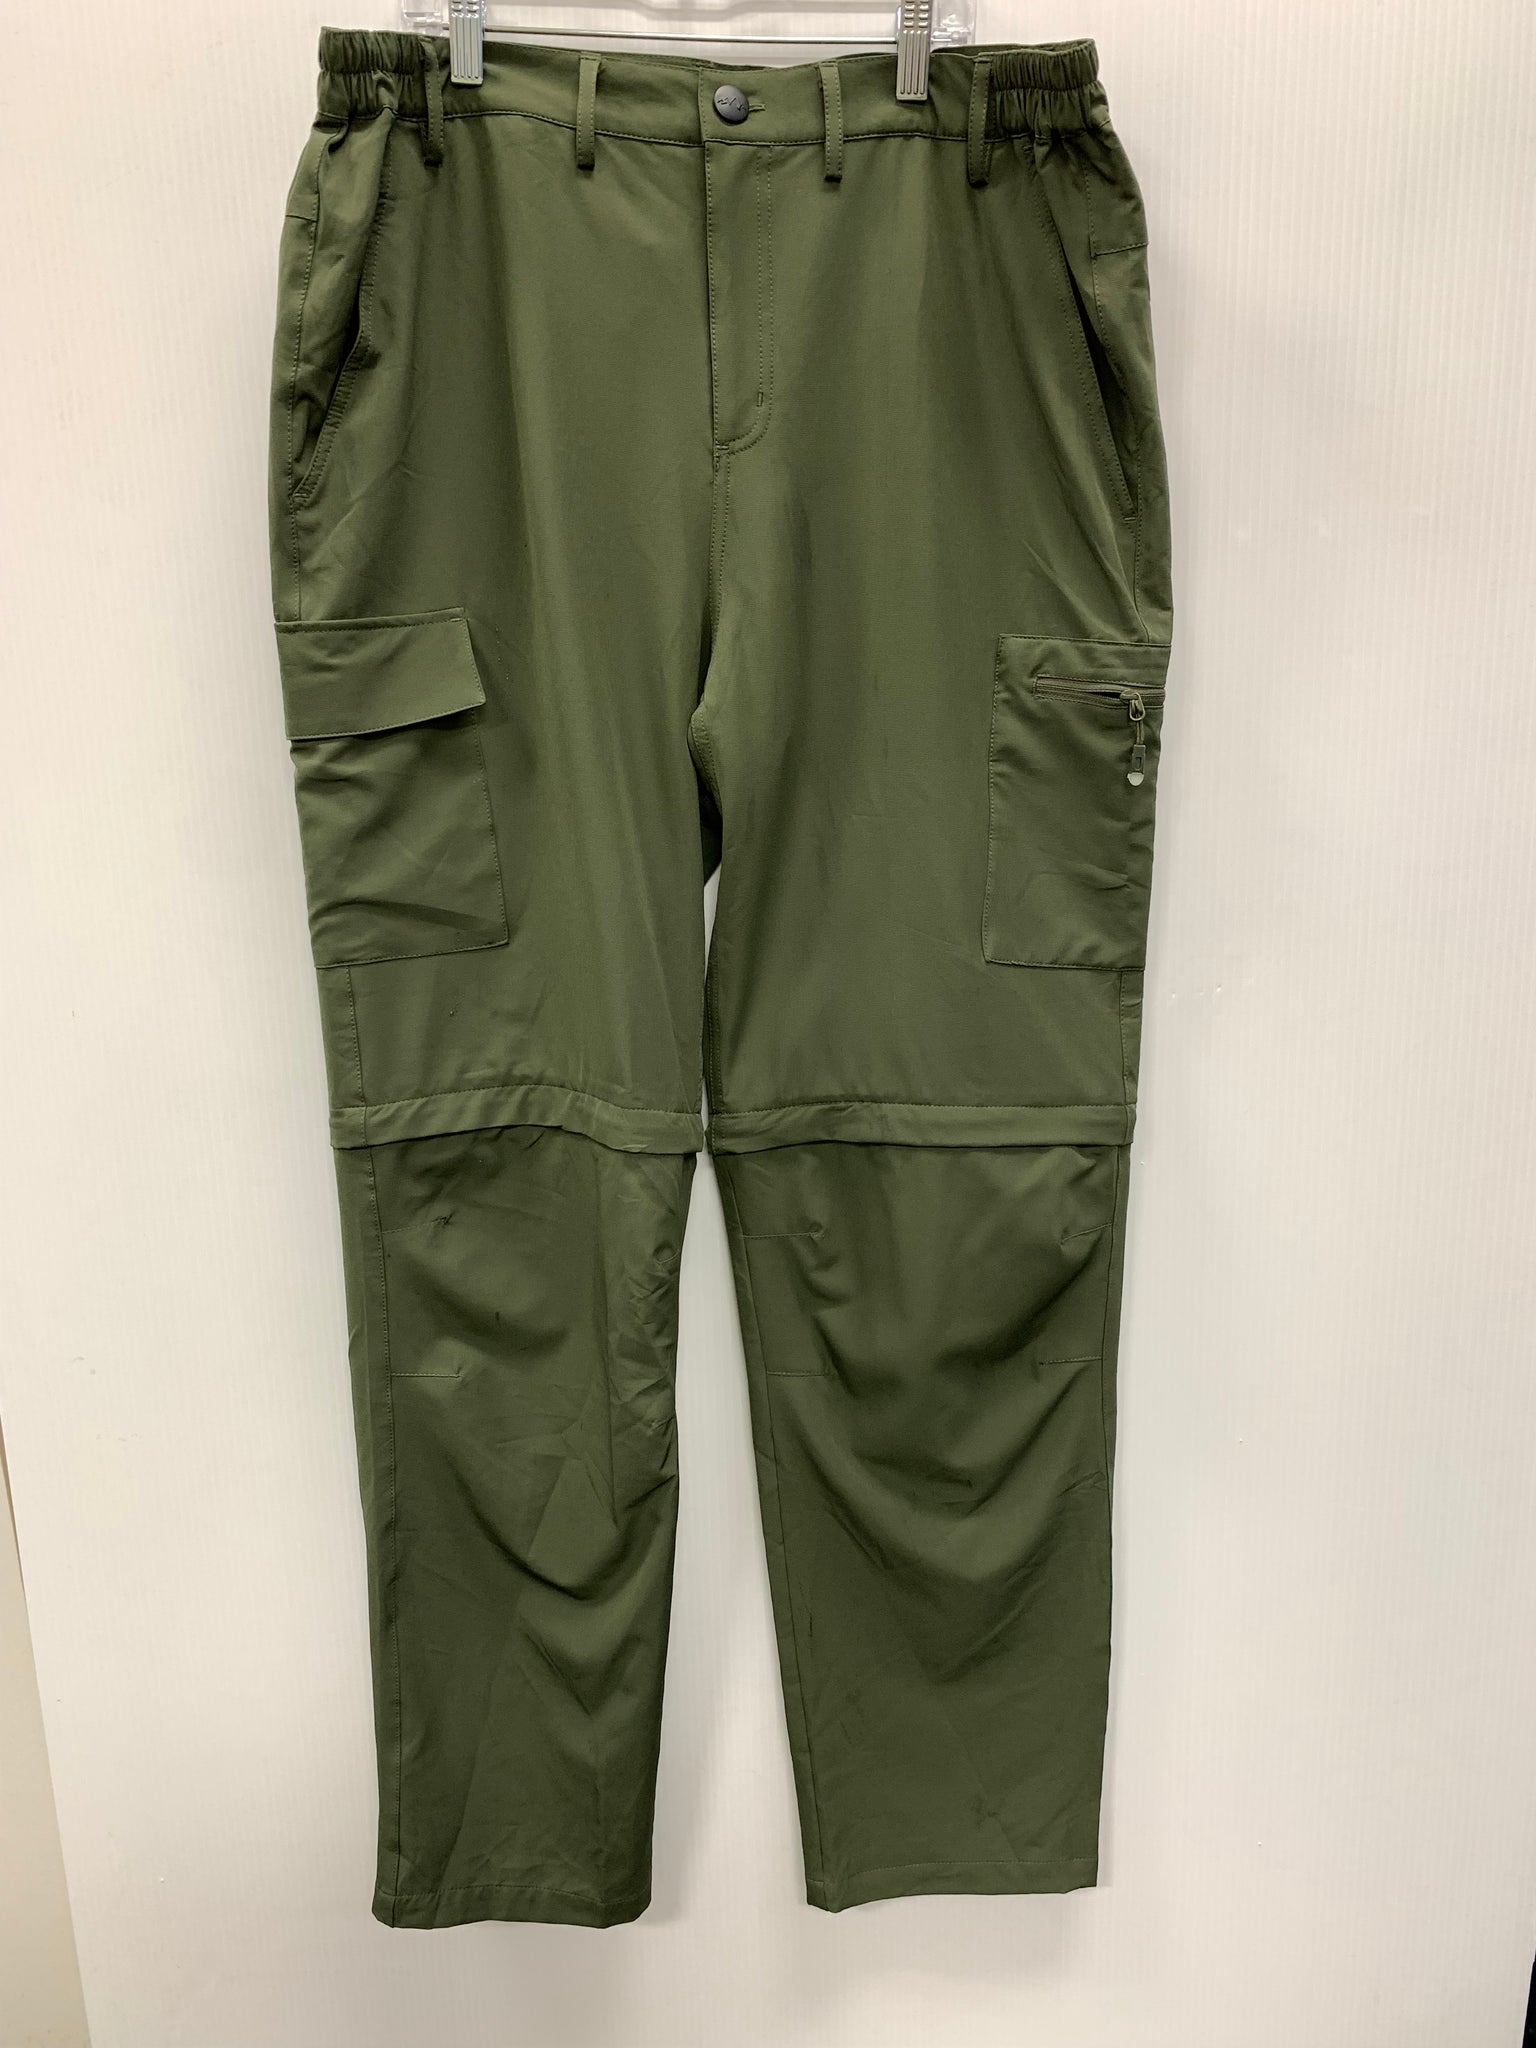 Size 34/32 Northbound Gear Pants Item No. 2039